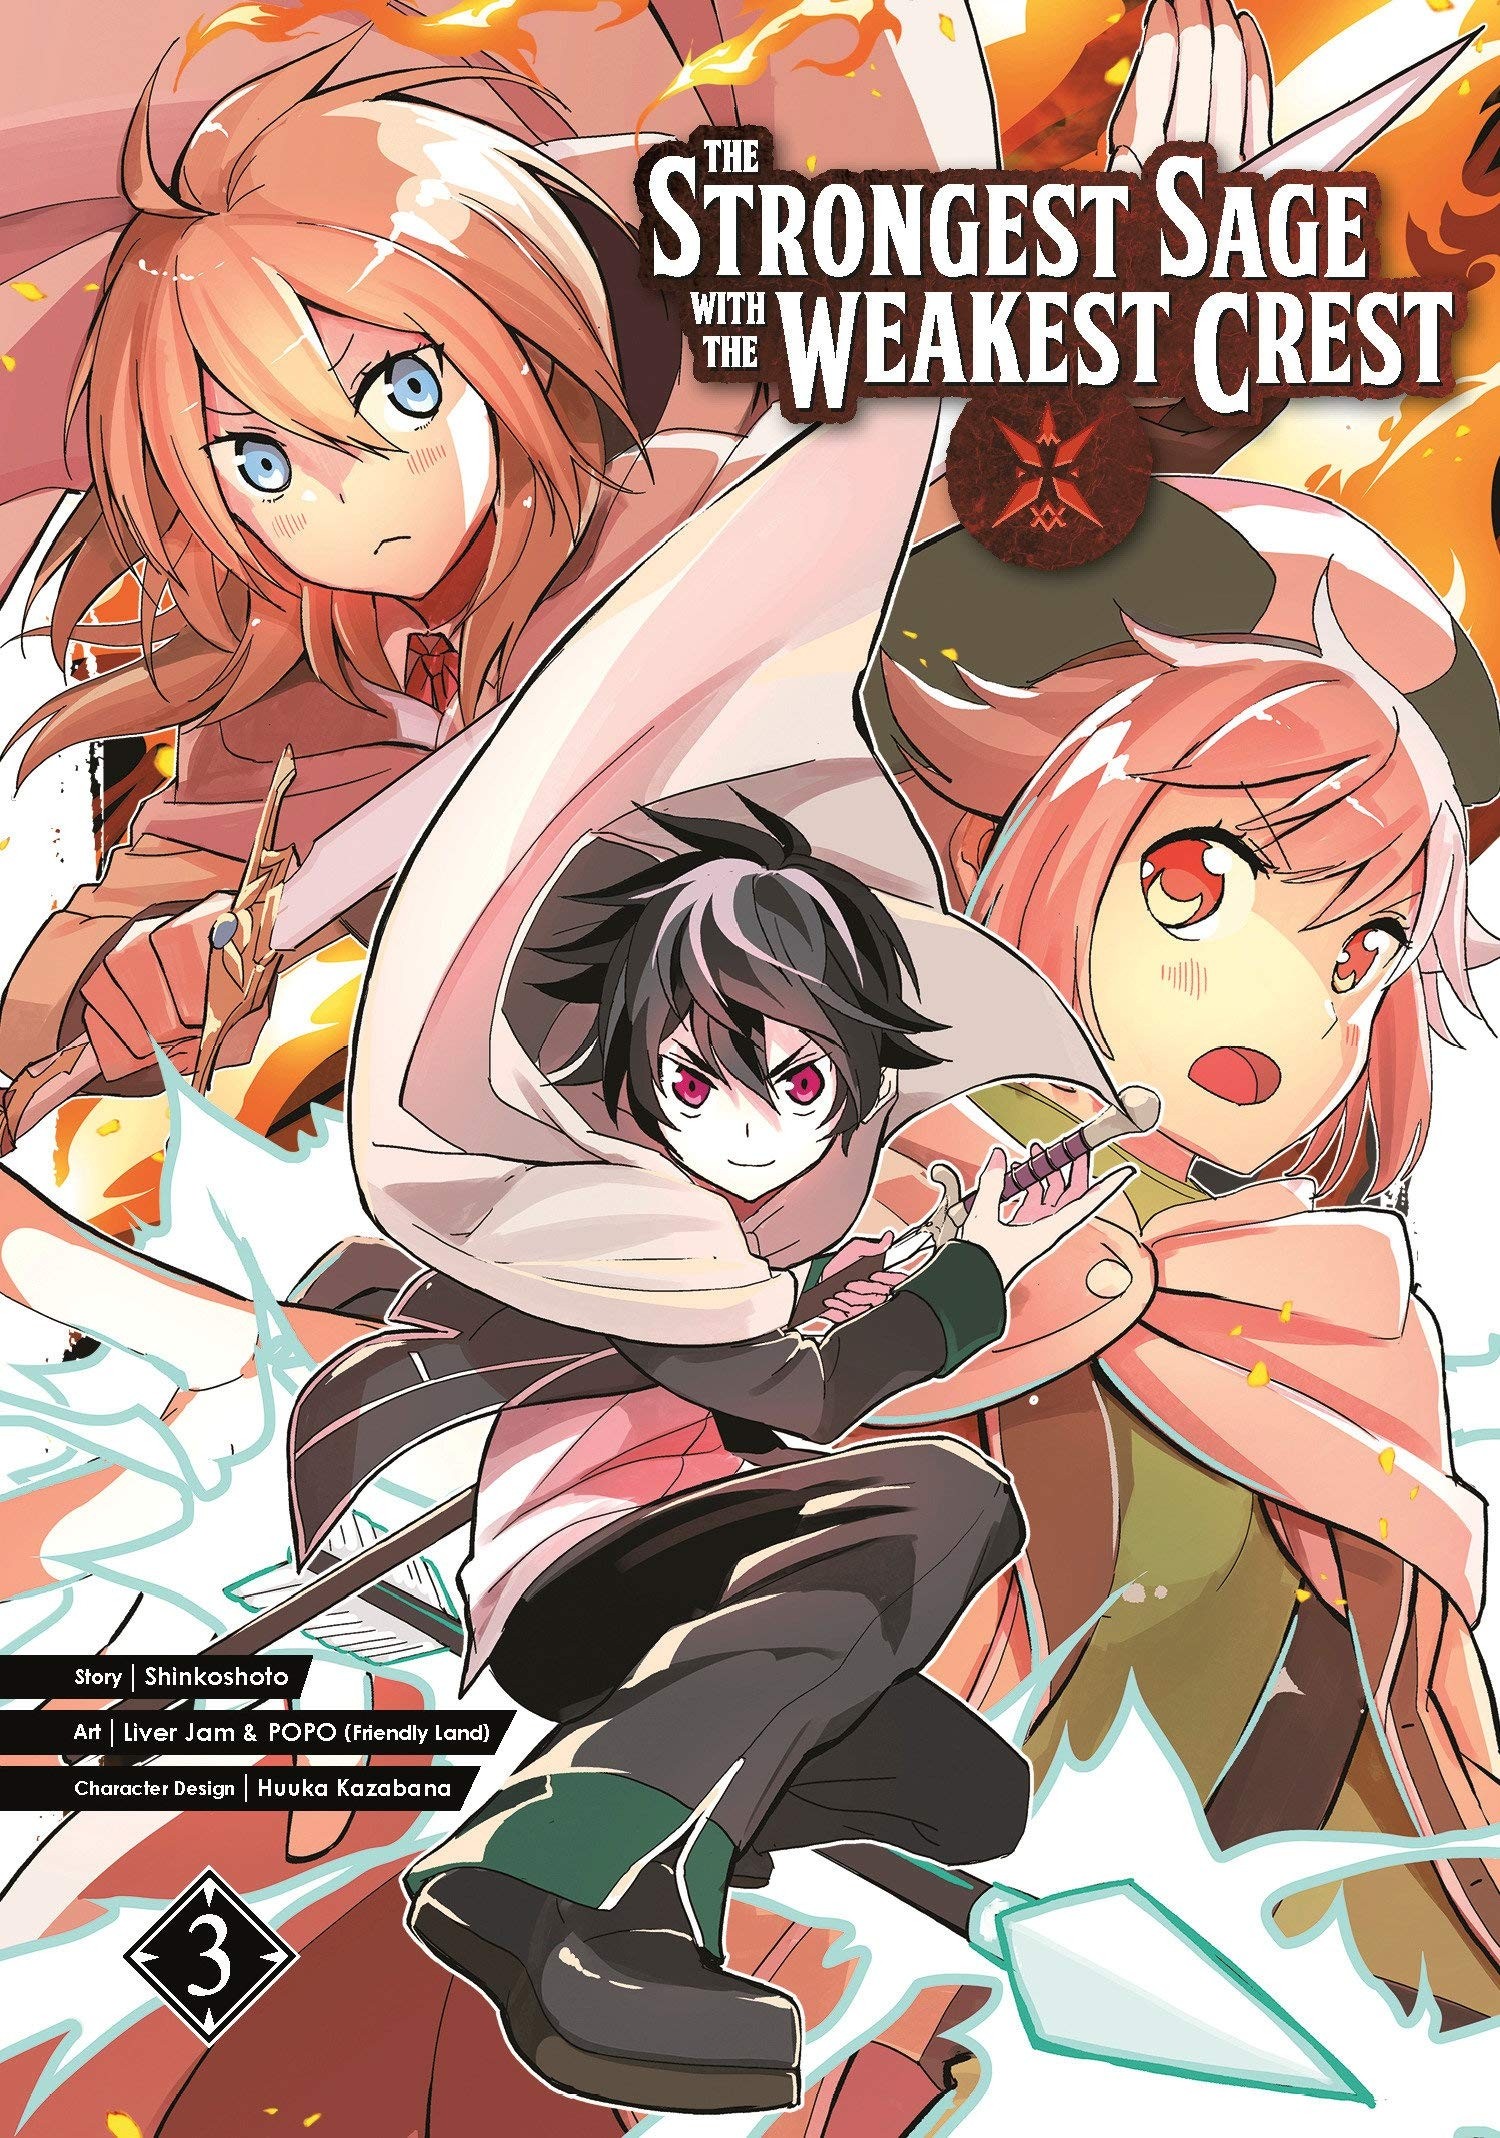 The Strongest Sage with the Weakest Crest, Vol. 03